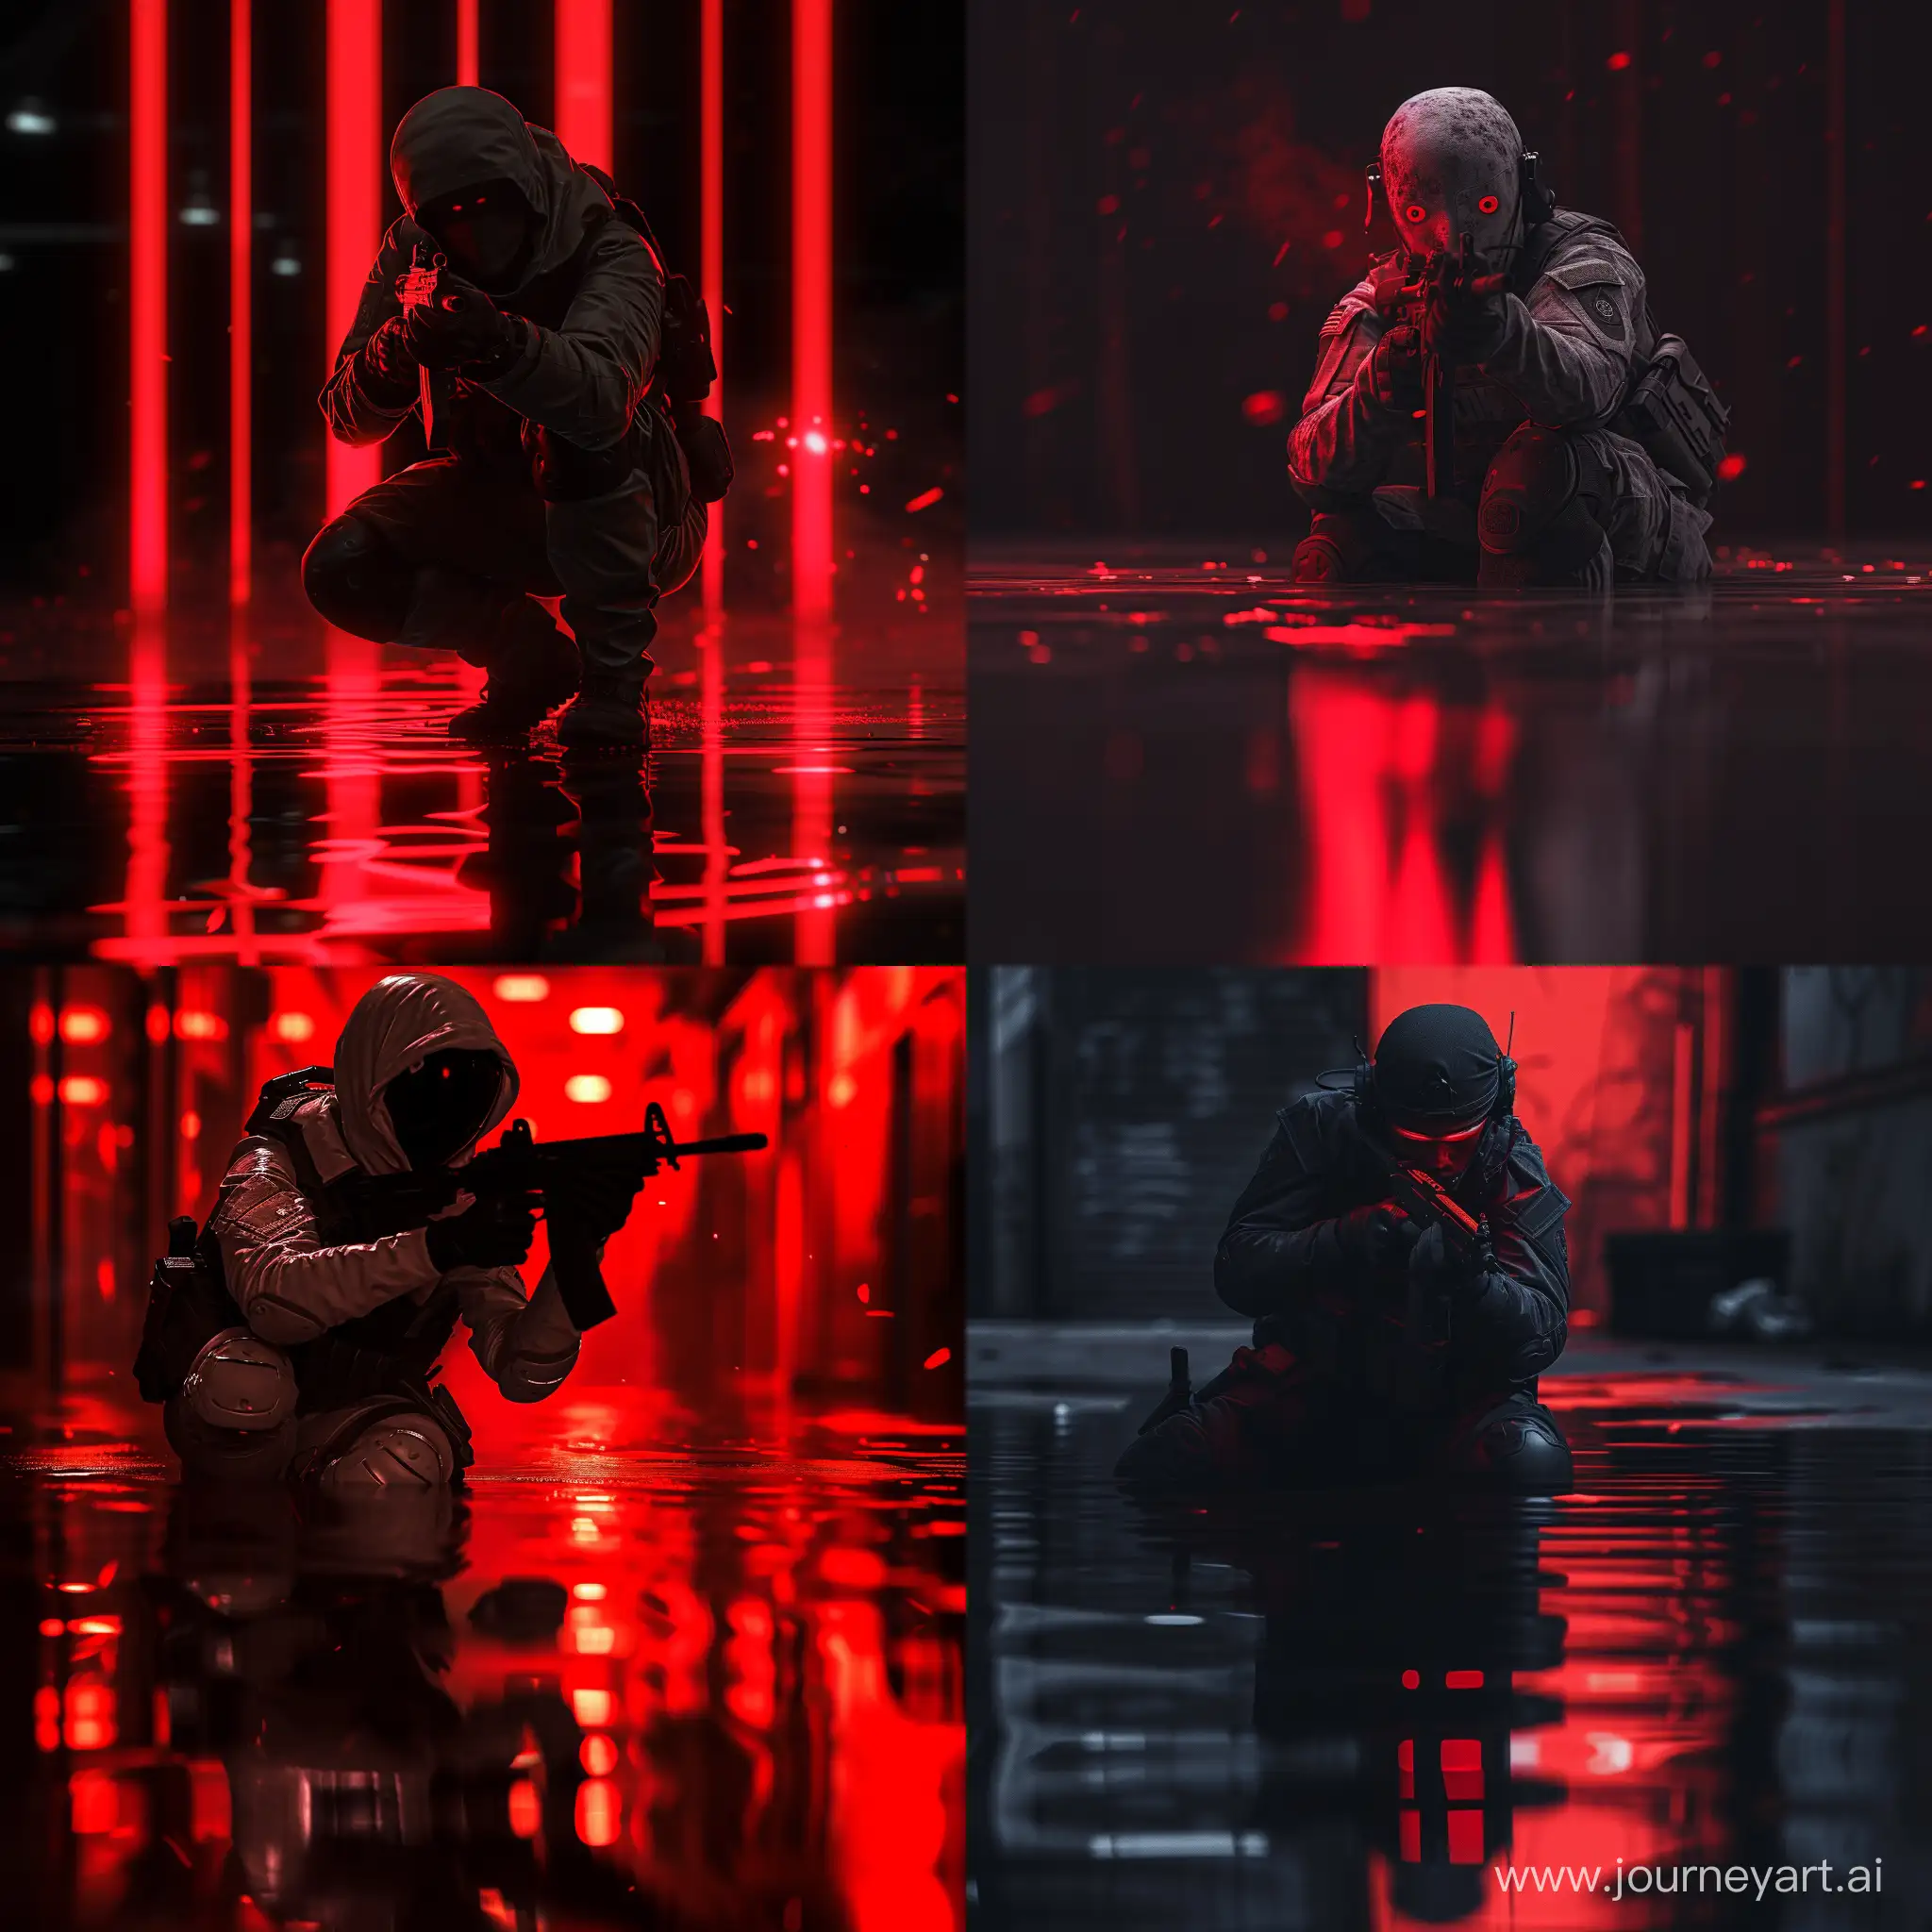 Call of Duty Character: Ghost With a gun in hand in the middle of Dark Place, Red Light Reflection, Cinematic Pose, Medium Shot, Affinity Designer Software, High Precision--v 6